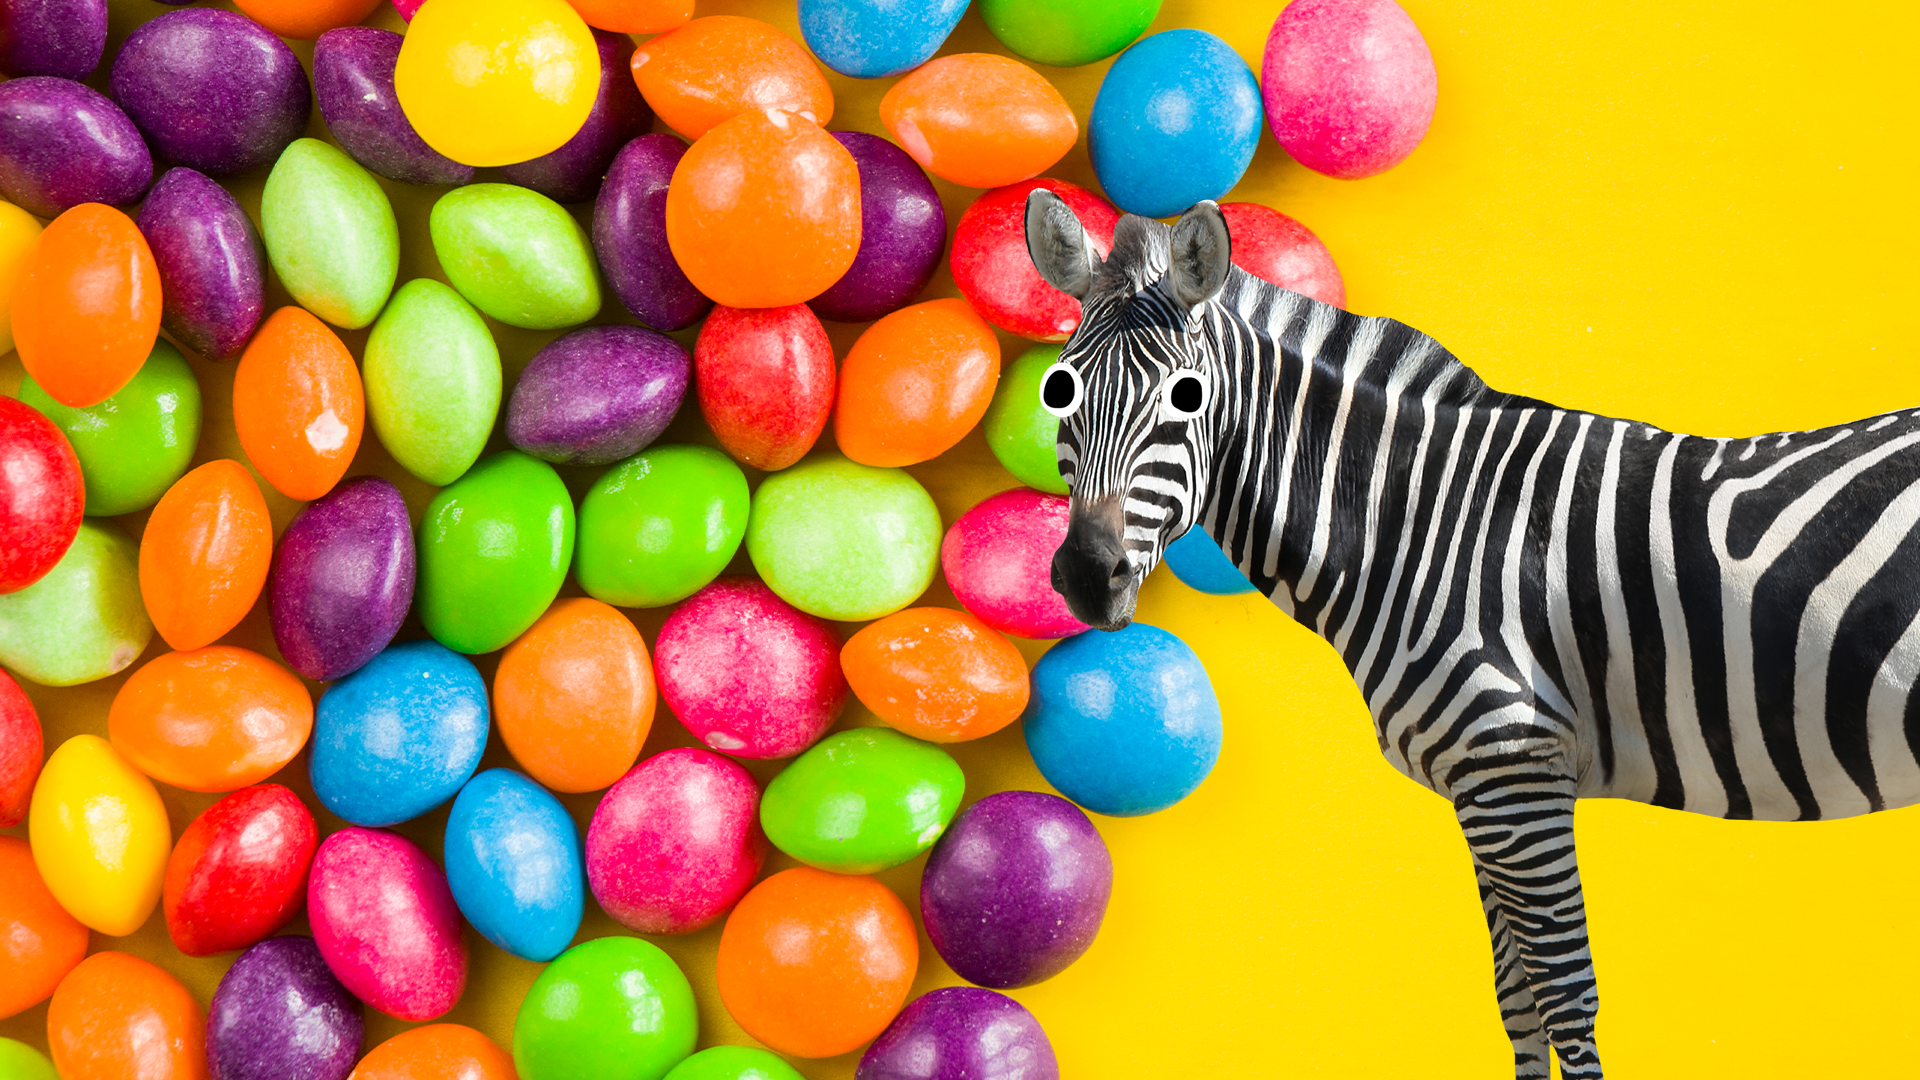 Skittles on yellow background with derpy zebra